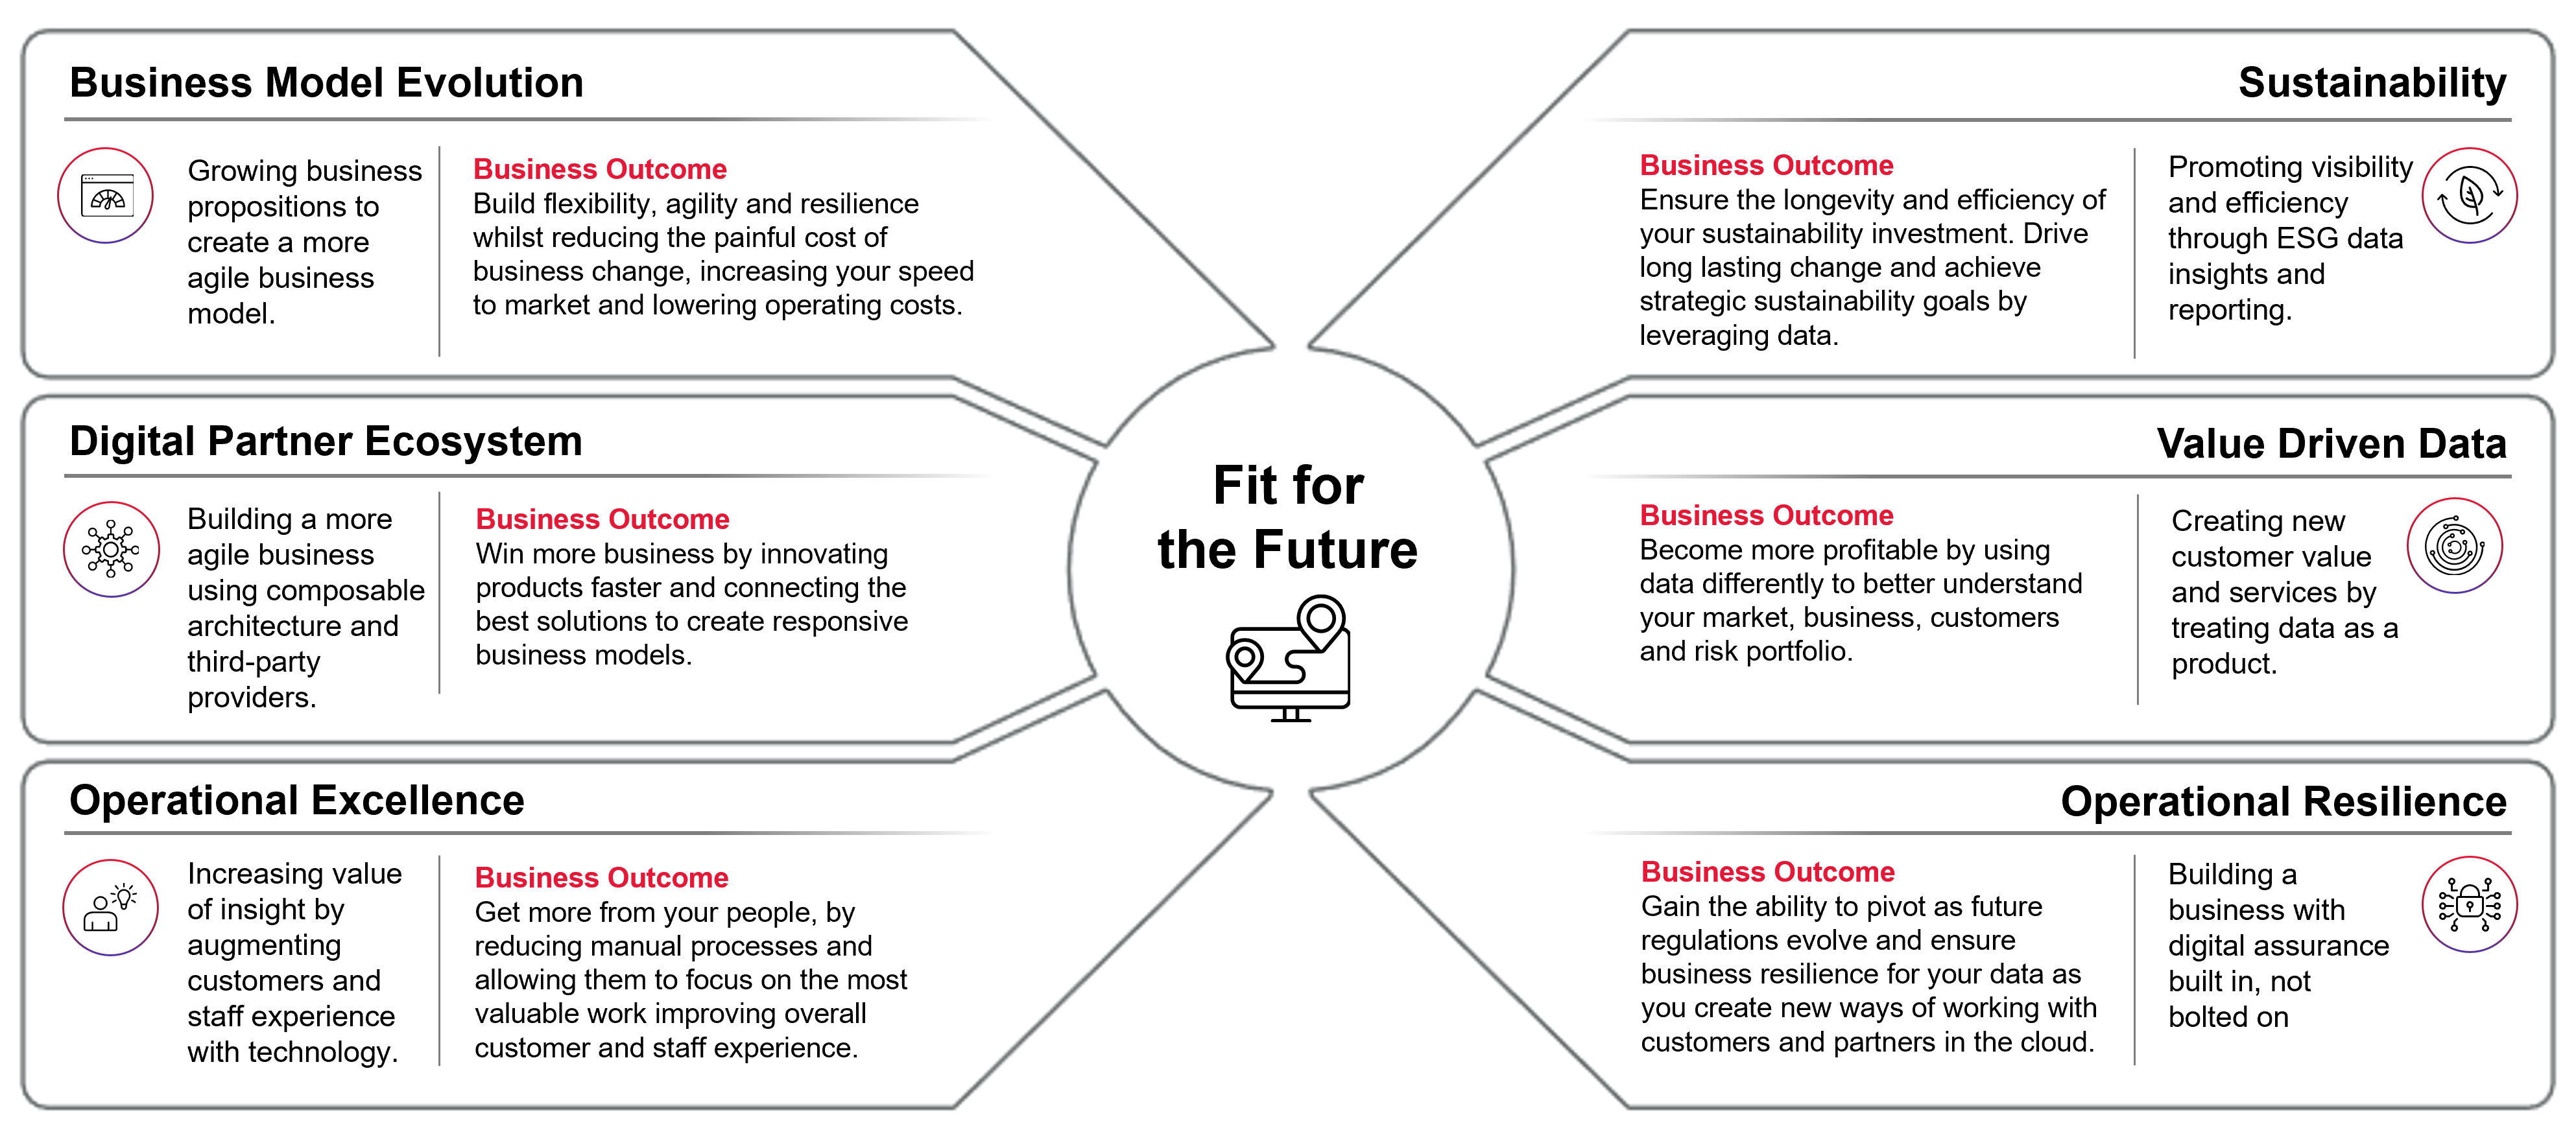 Asset Finance fit for future infographic diagram